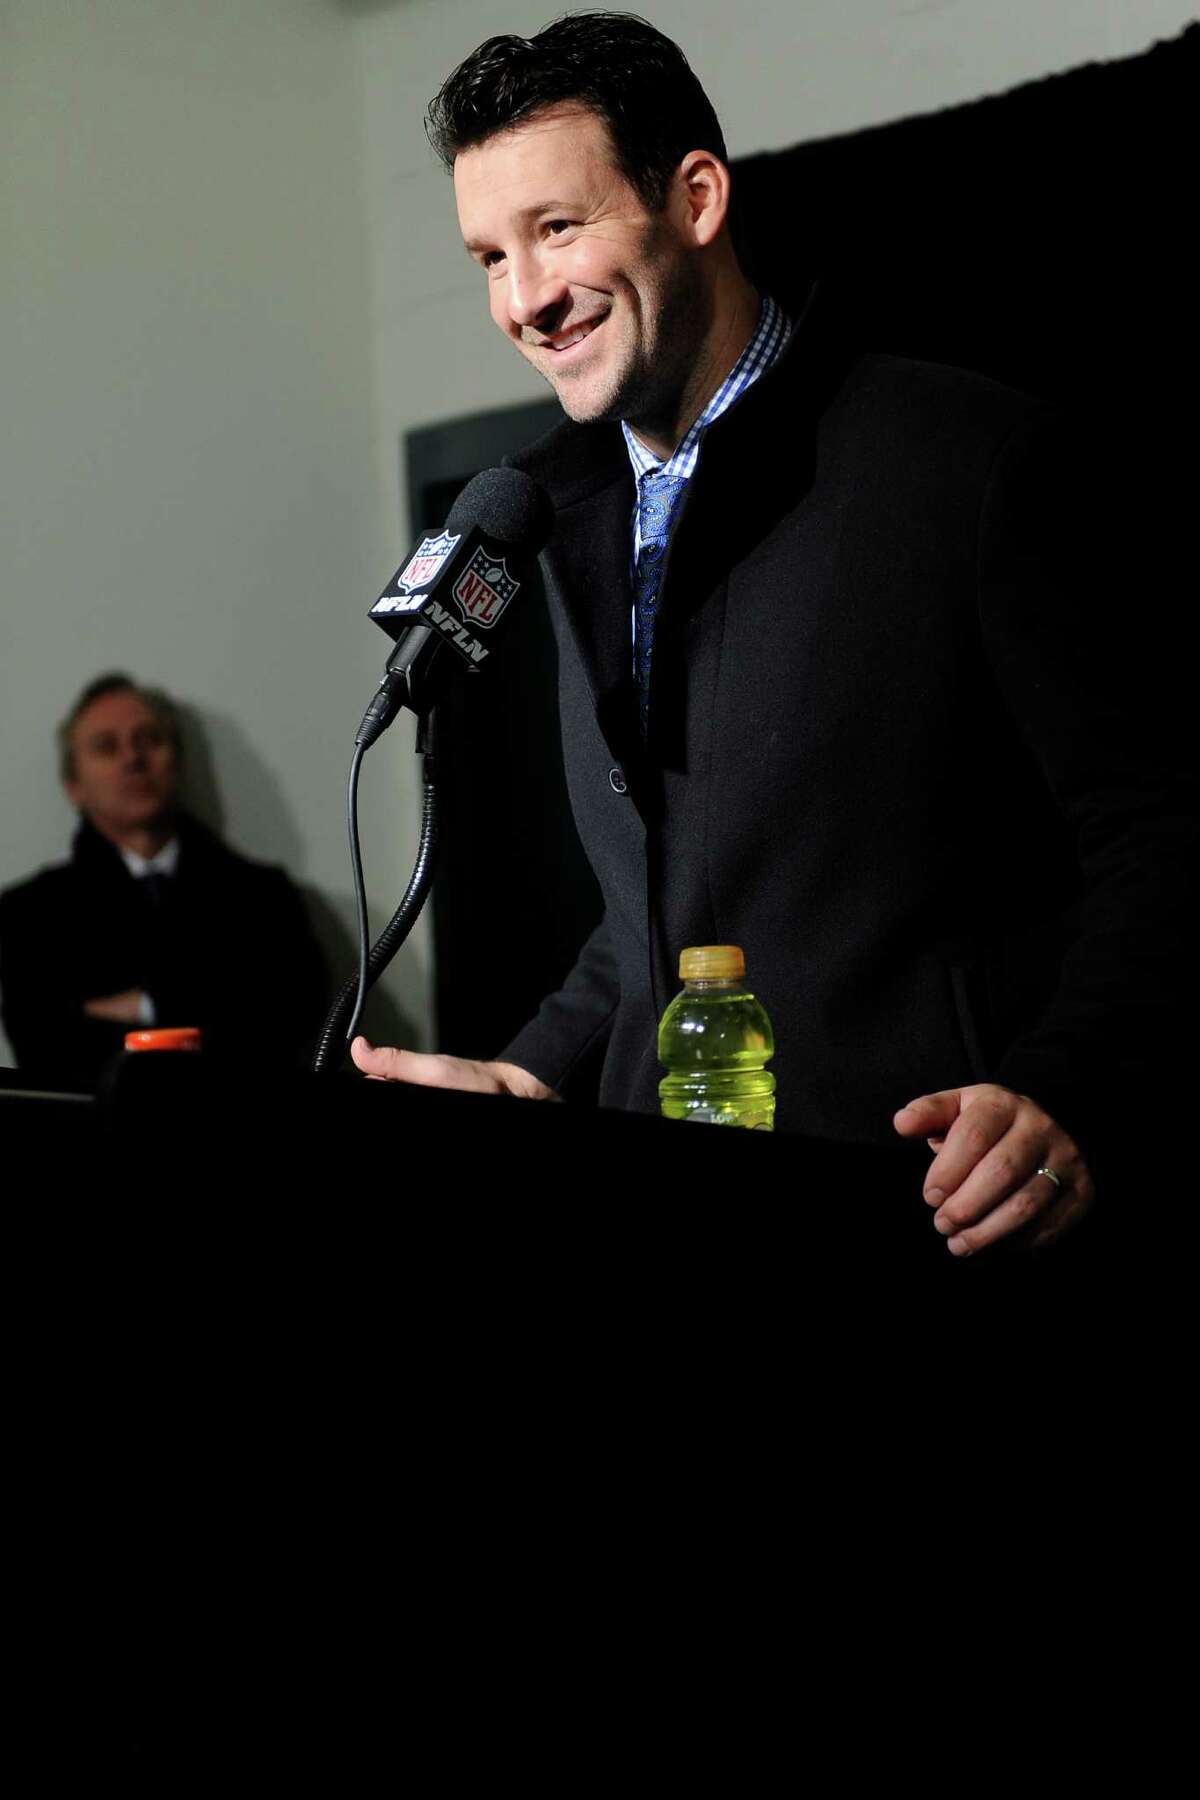 Dallas Cowboys' Tony Romo speaks during a news conference after an NFL football game against the Philadelphia Eagles, Sunday, Jan. 1, 2017, in Philadelphia. (AP Photo/Michael Perez)